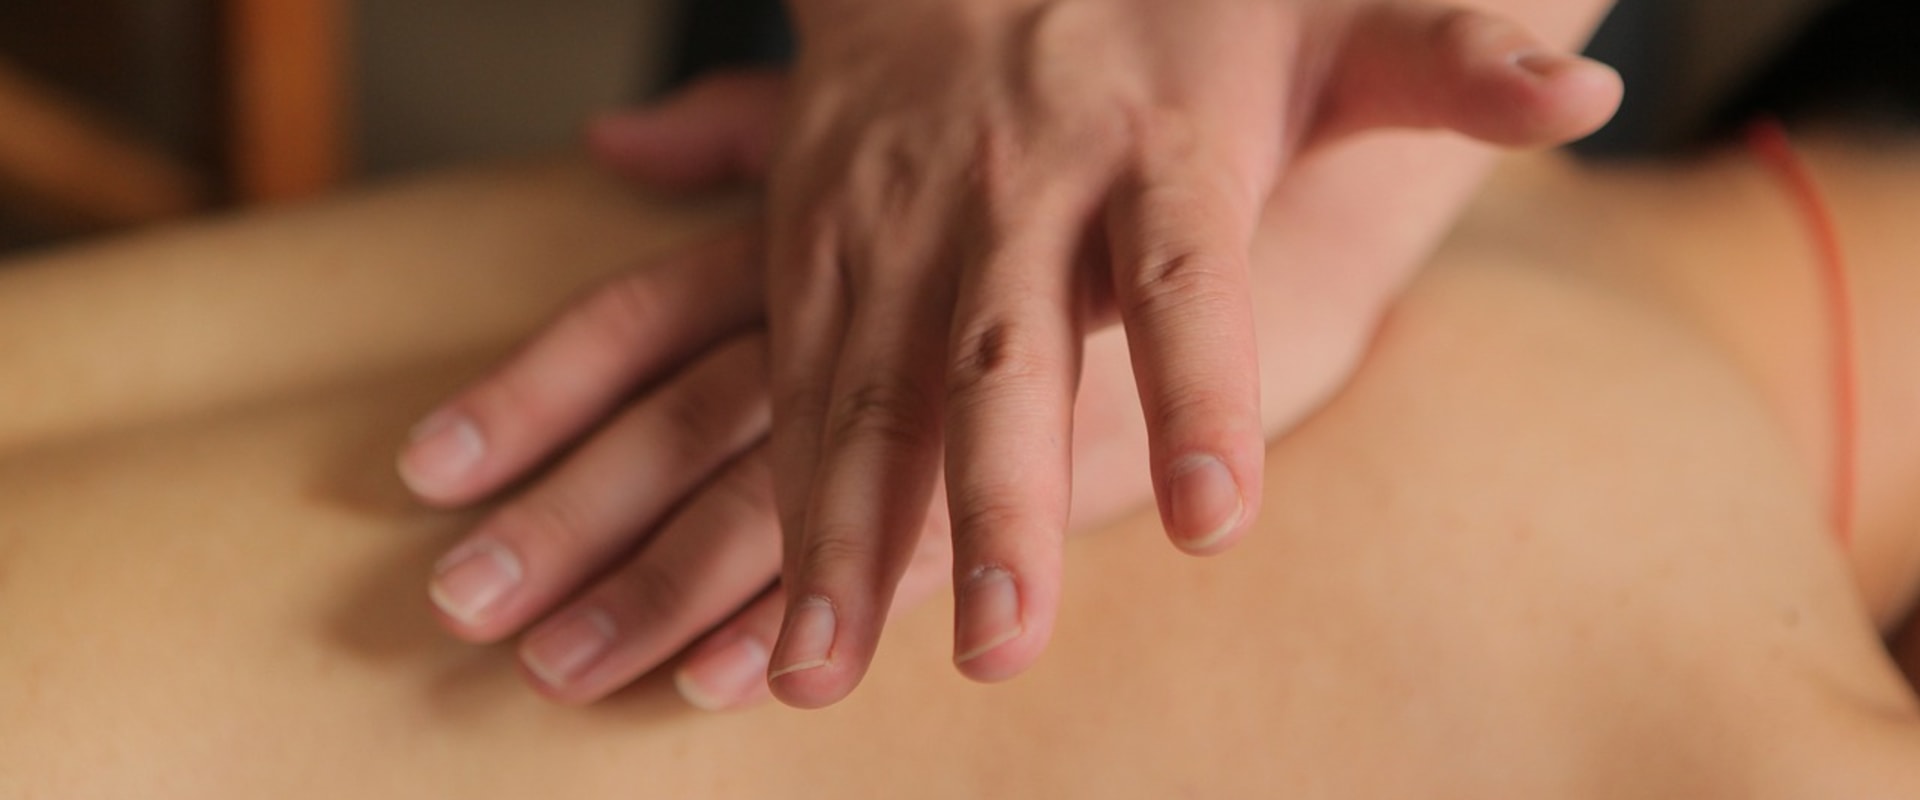 What Type of Massage is Best for Your Back?